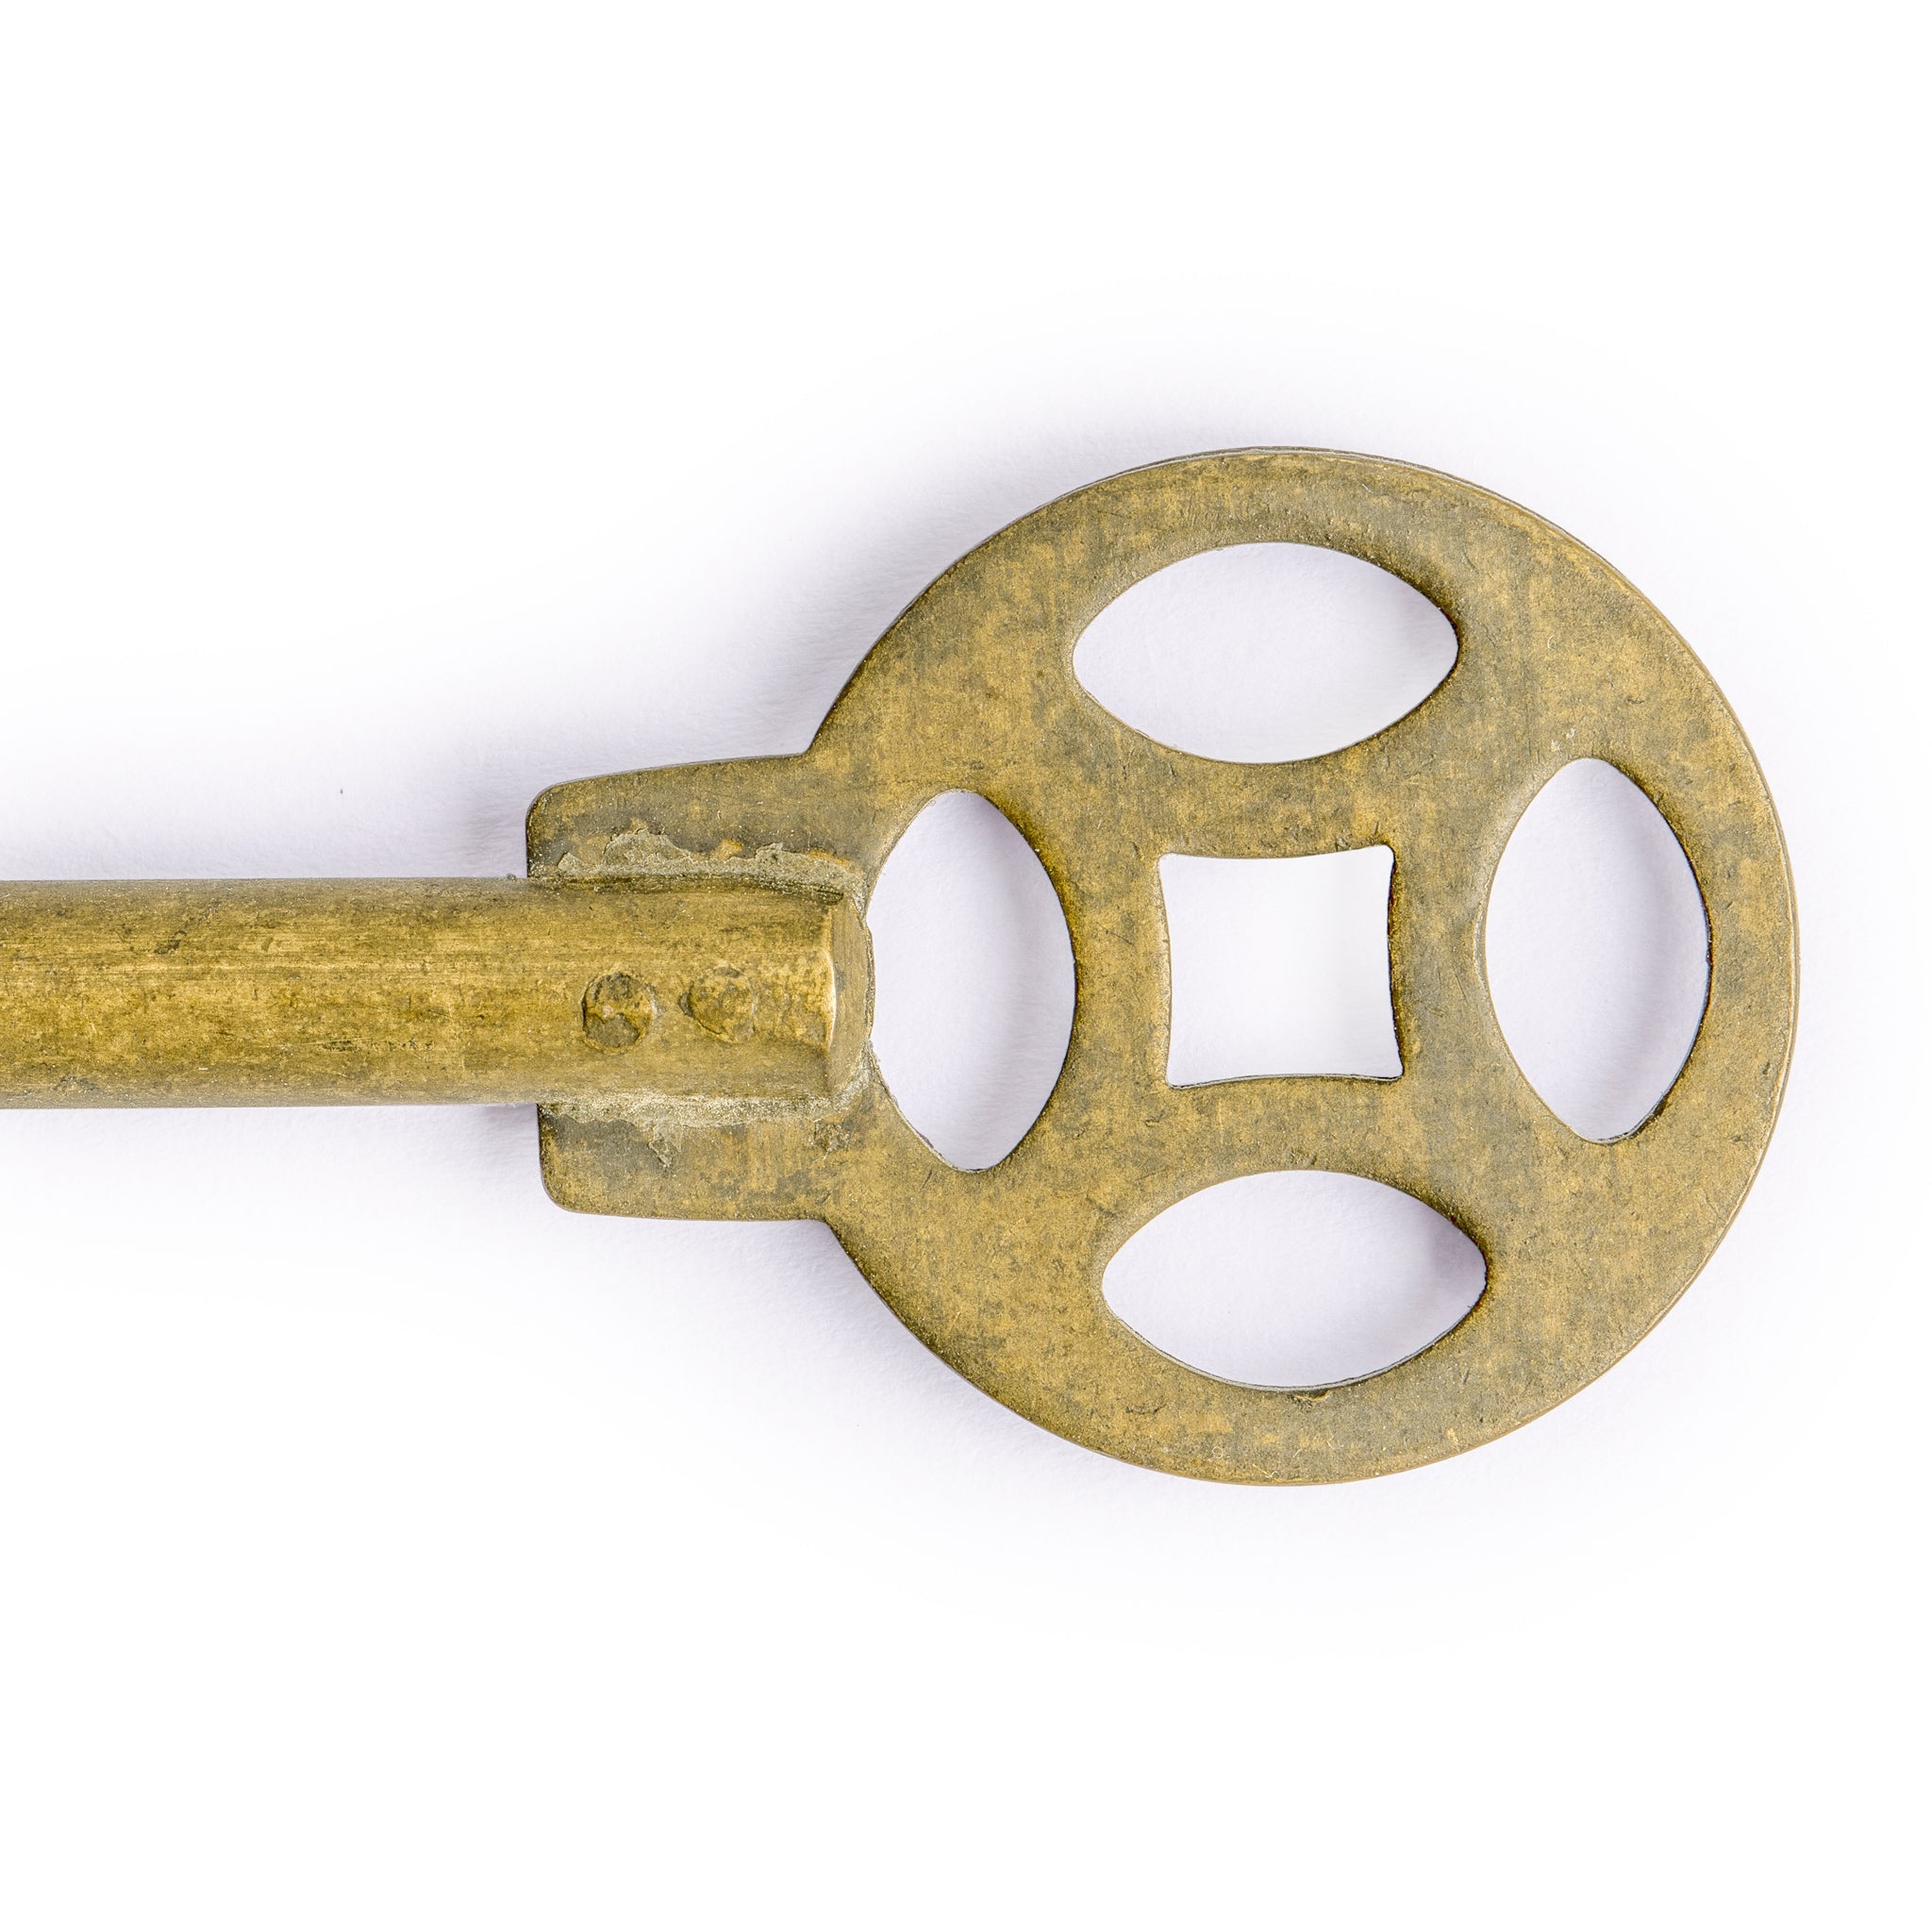 Money Coin Key 6.7" - Set of 2-Chinese Brass Hardware